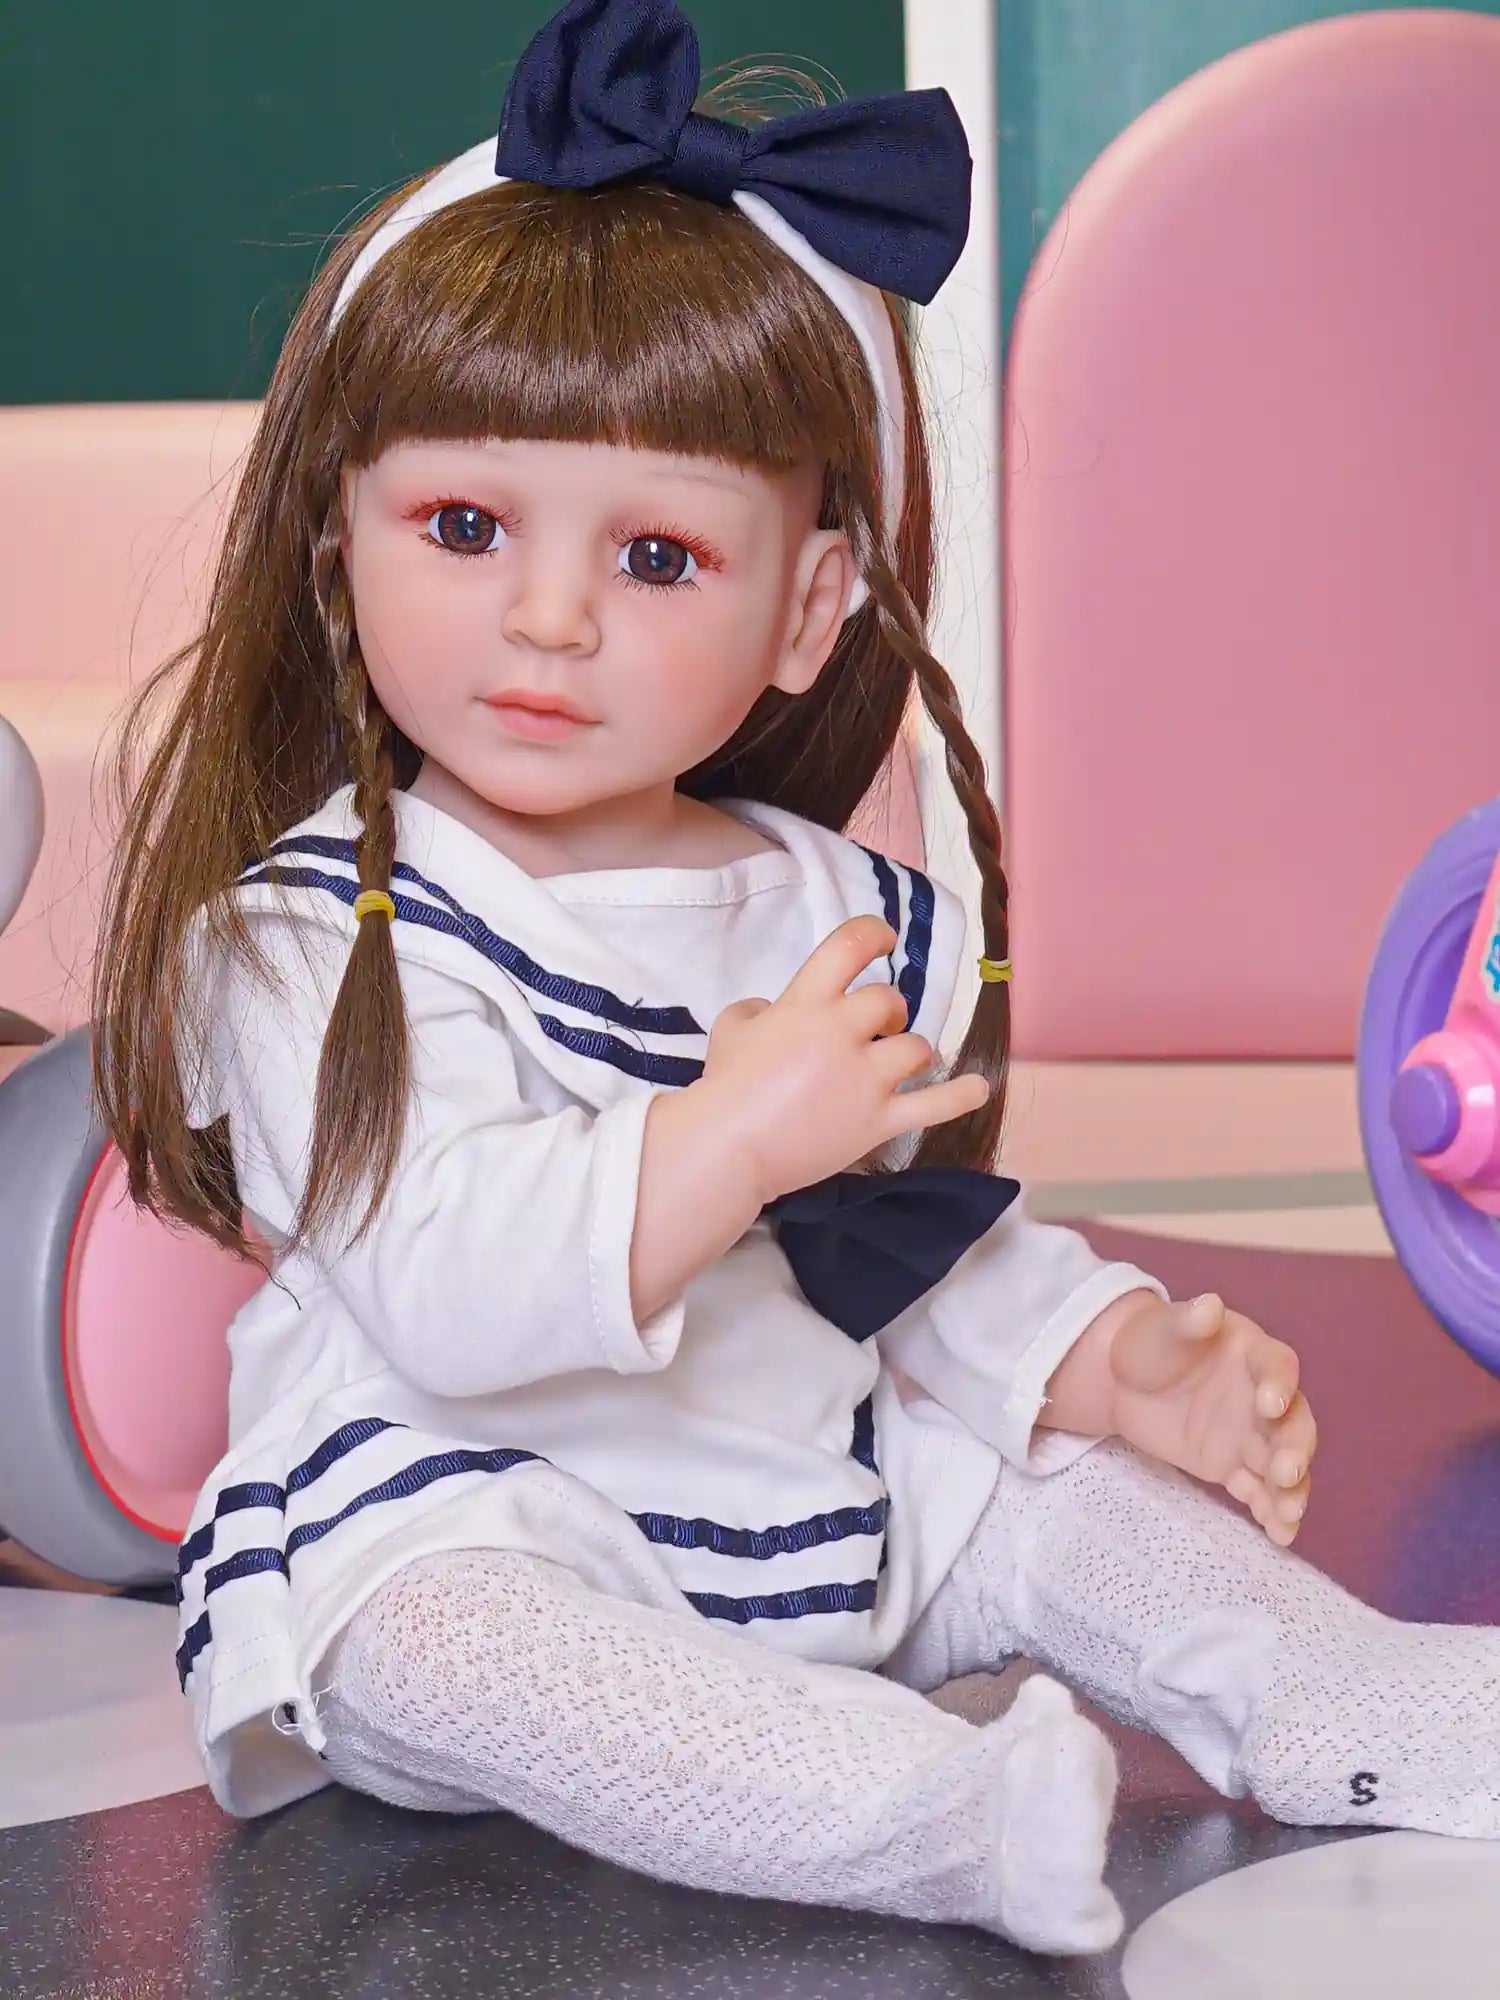 Detailed play doll featuring human-like eyes and expression, dressed in a purple top and patterned skirt, resting on the floor.